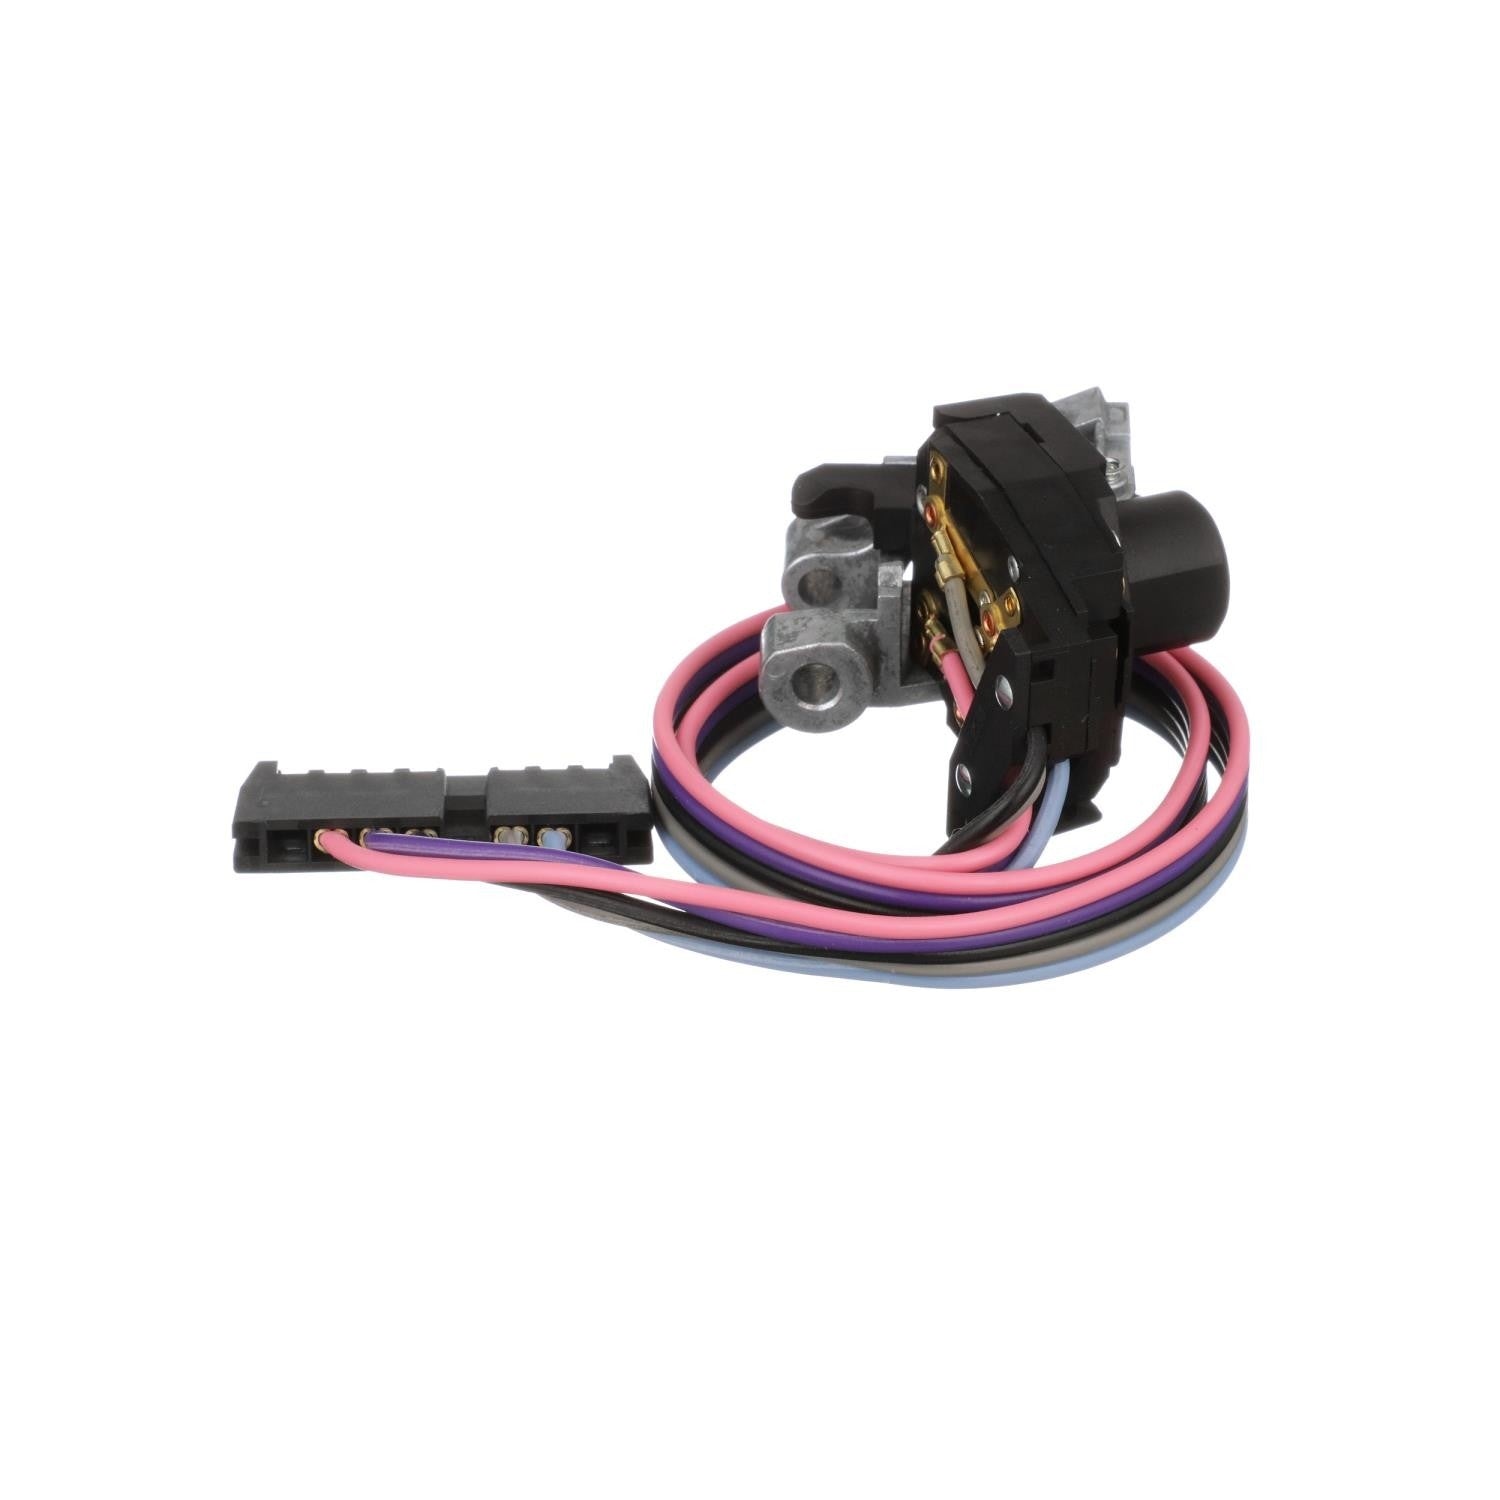 Other View of Windshield Wiper Switch STANDARD IGNITION DS-817